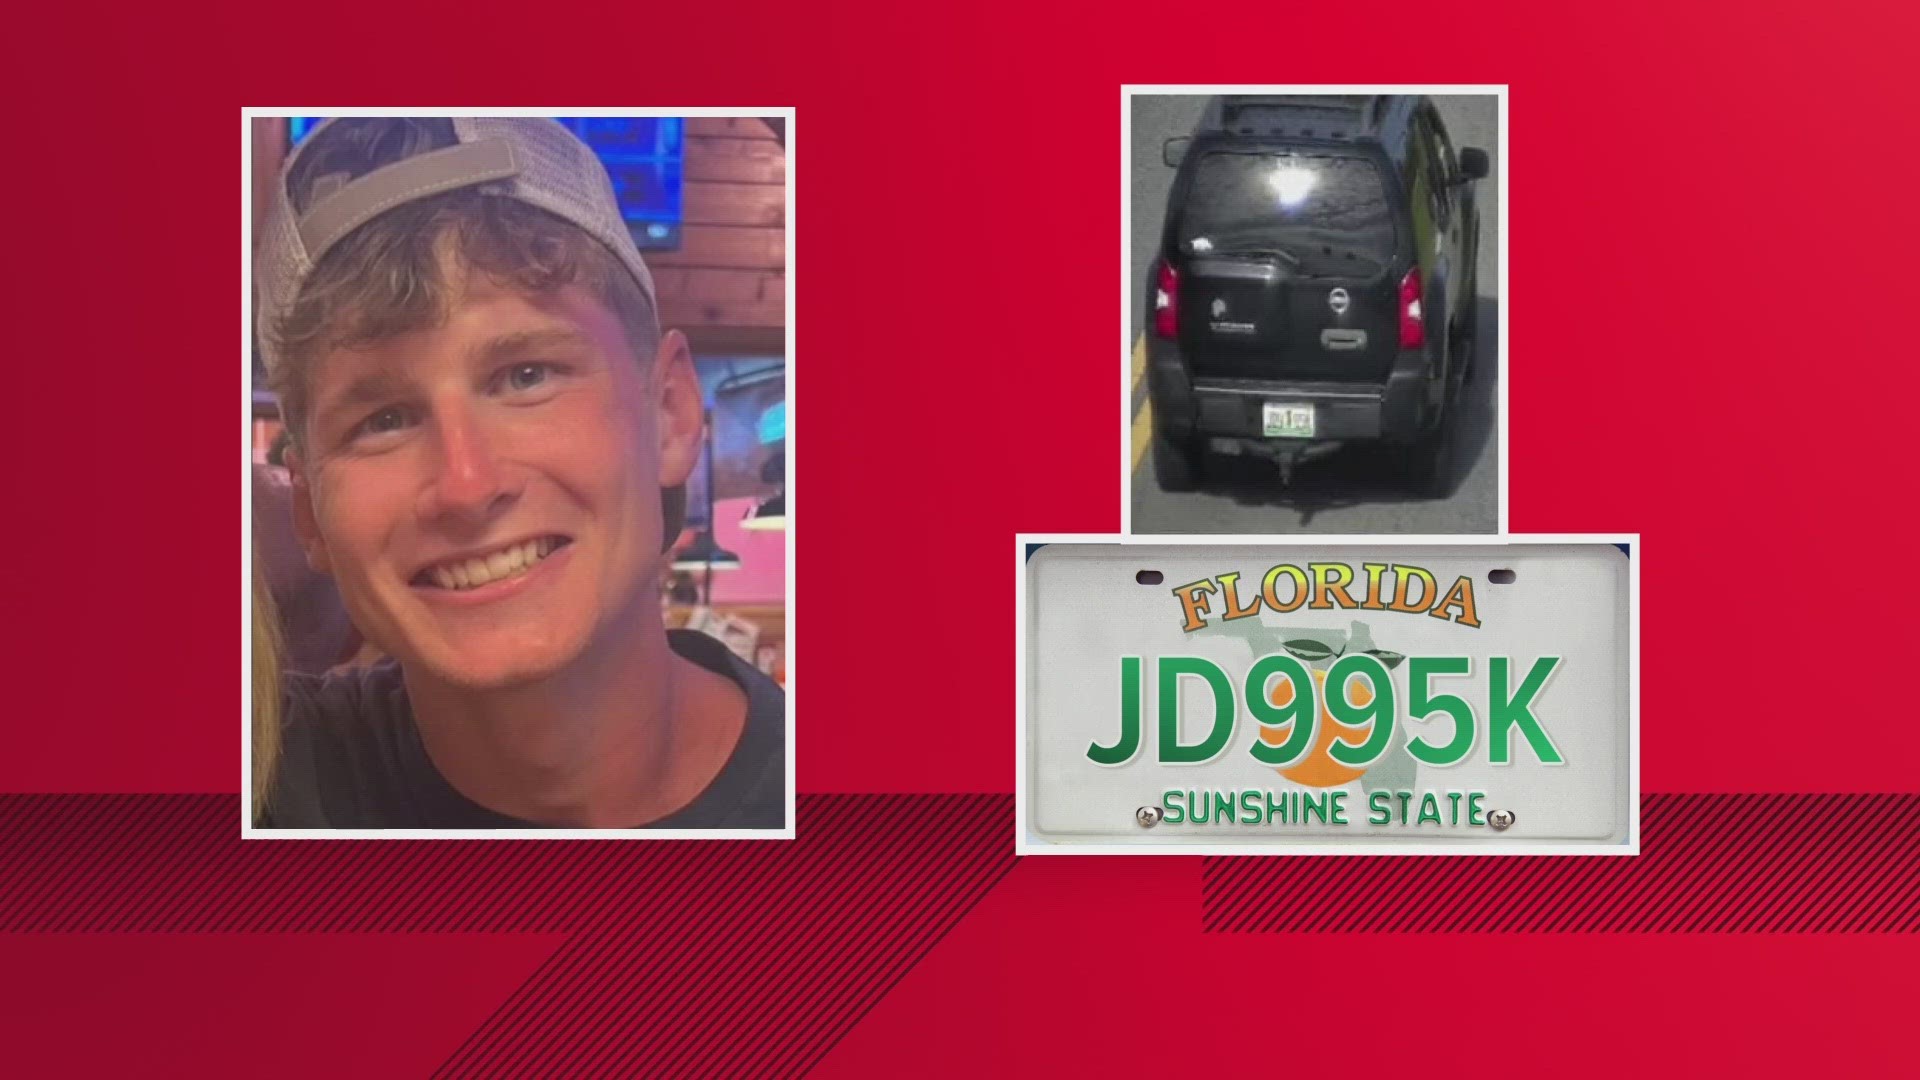 Samuel Mills, 21, was reported missing on Thursday but was safely located and returned home by the St. Johns County Sheriff's Office. Now, he's missing again.